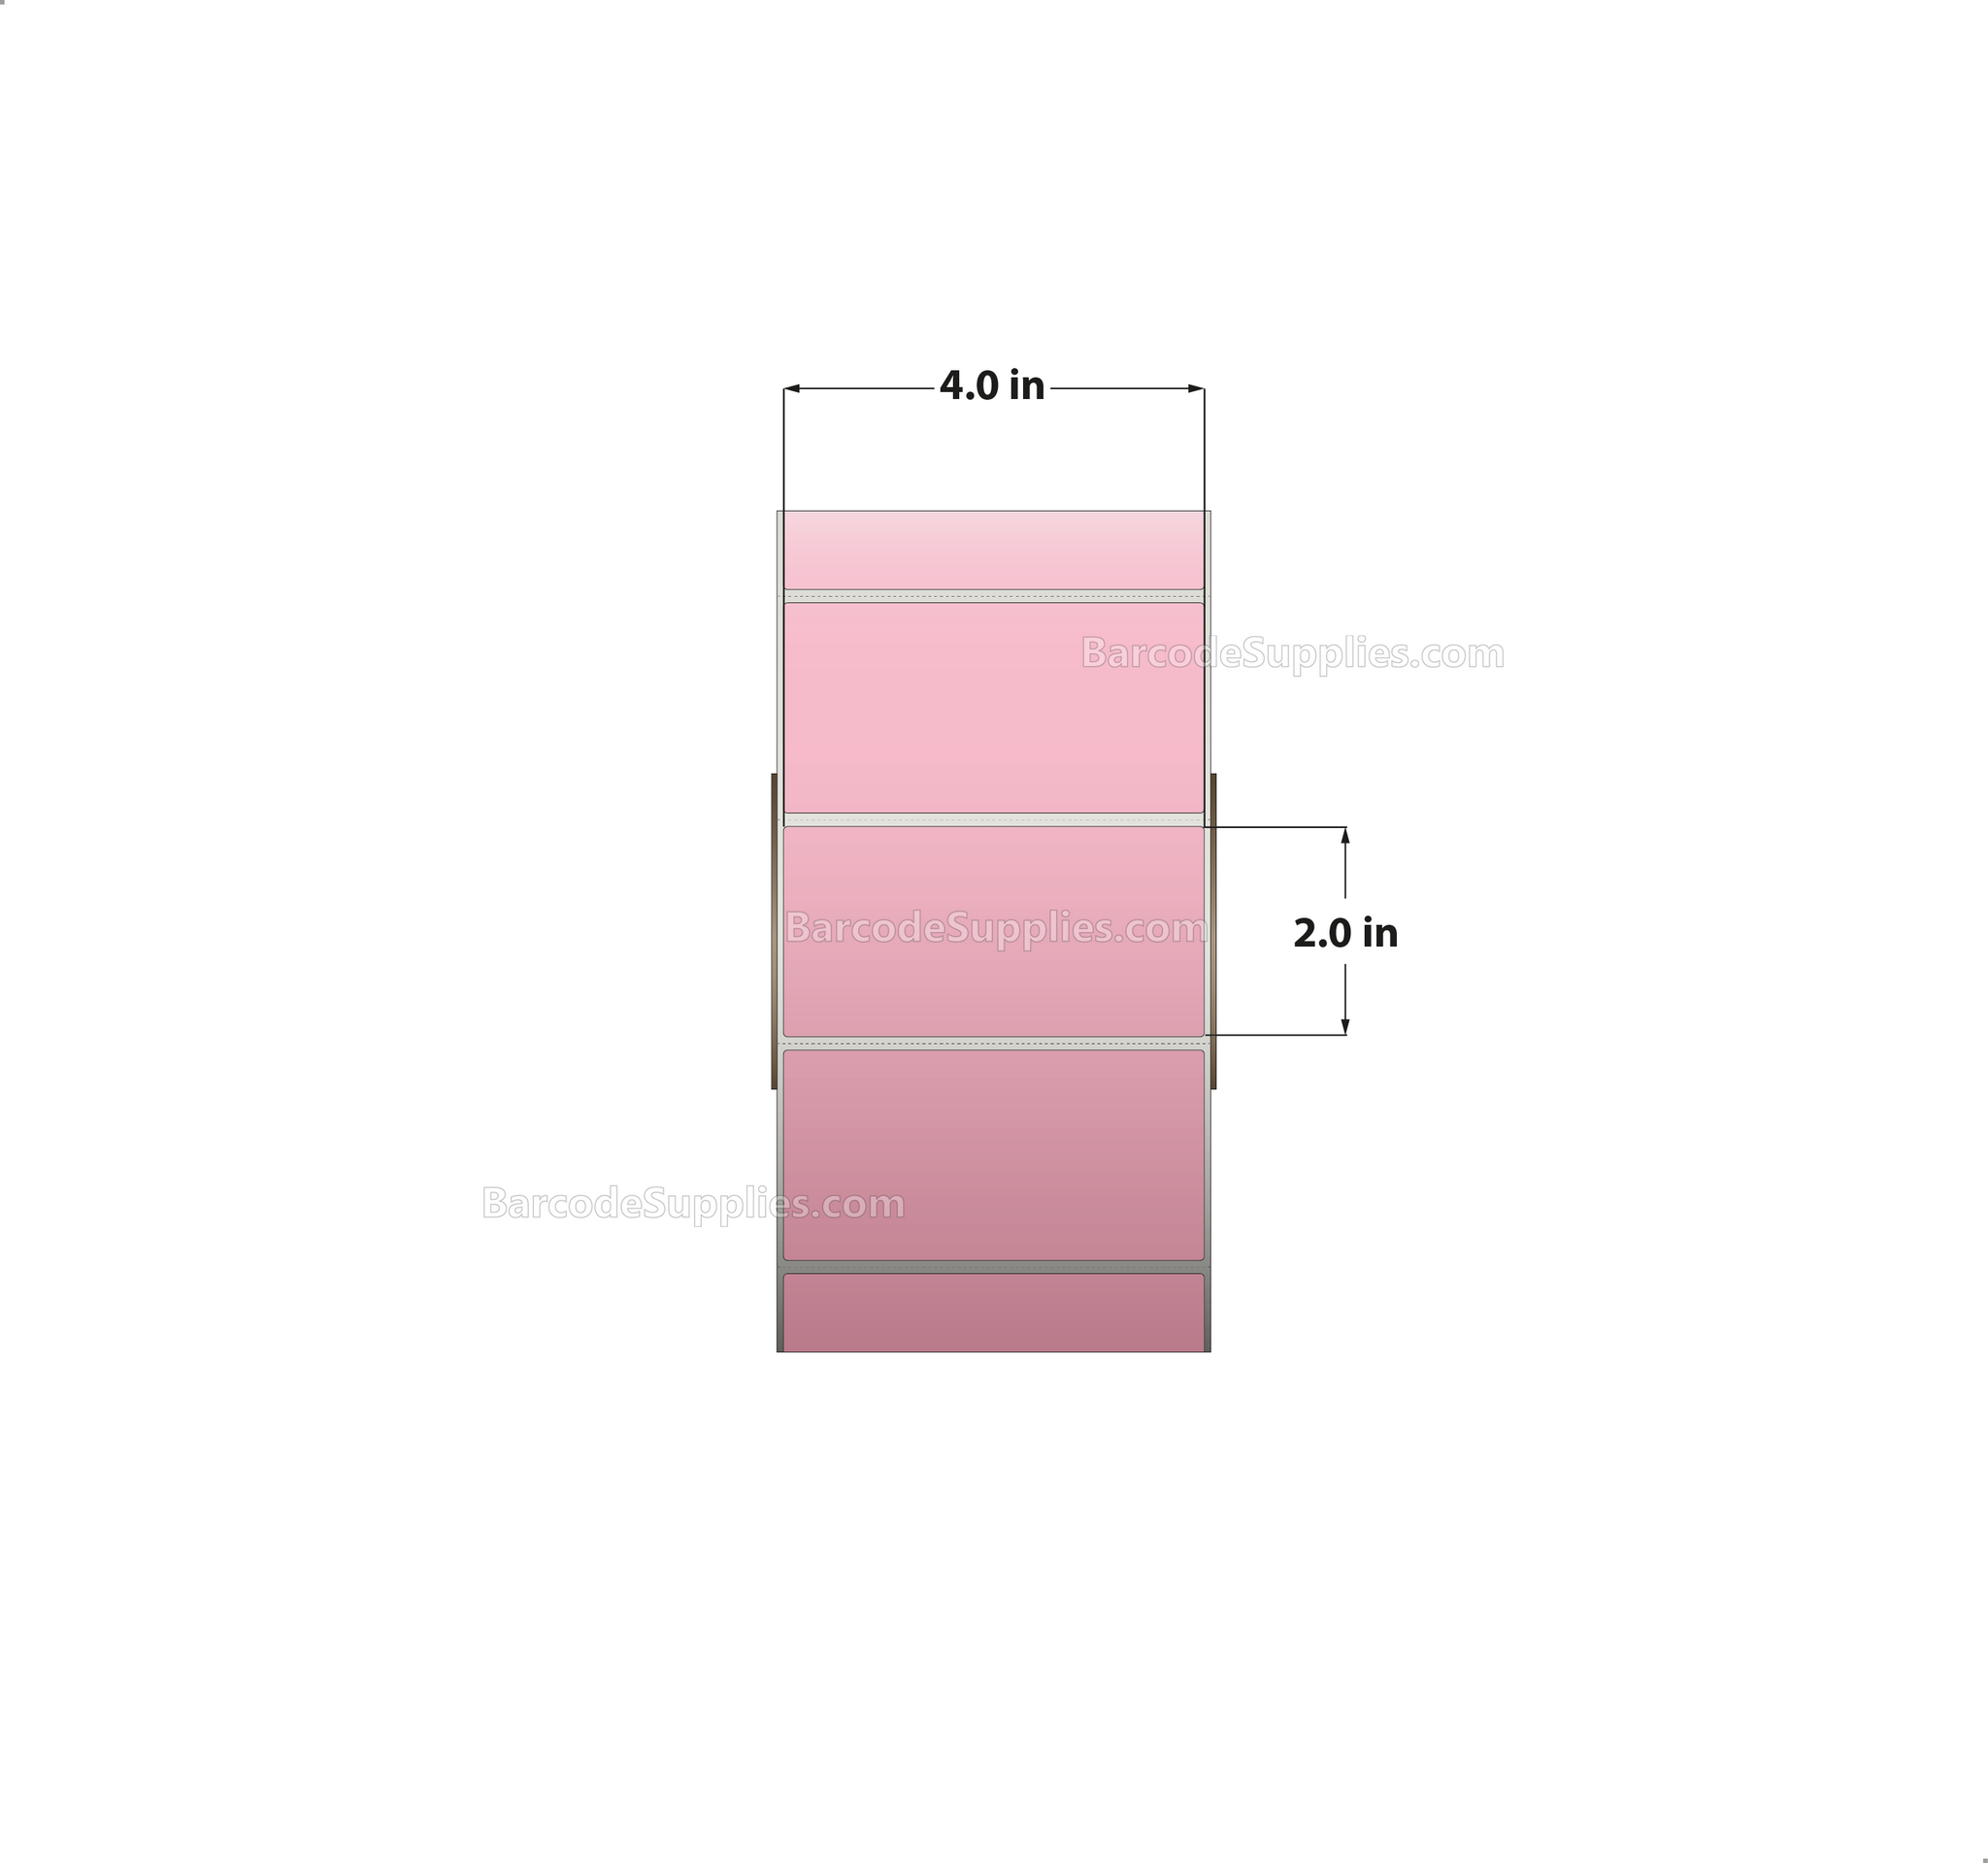 4 x 2 Thermal Transfer 196 PInk Labels With Permanent Acrylic Adhesive - Perforated - 3000 Labels Per Roll - Carton Of 4 Rolls - 12000 Labels Total - MPN: TH42-1PP